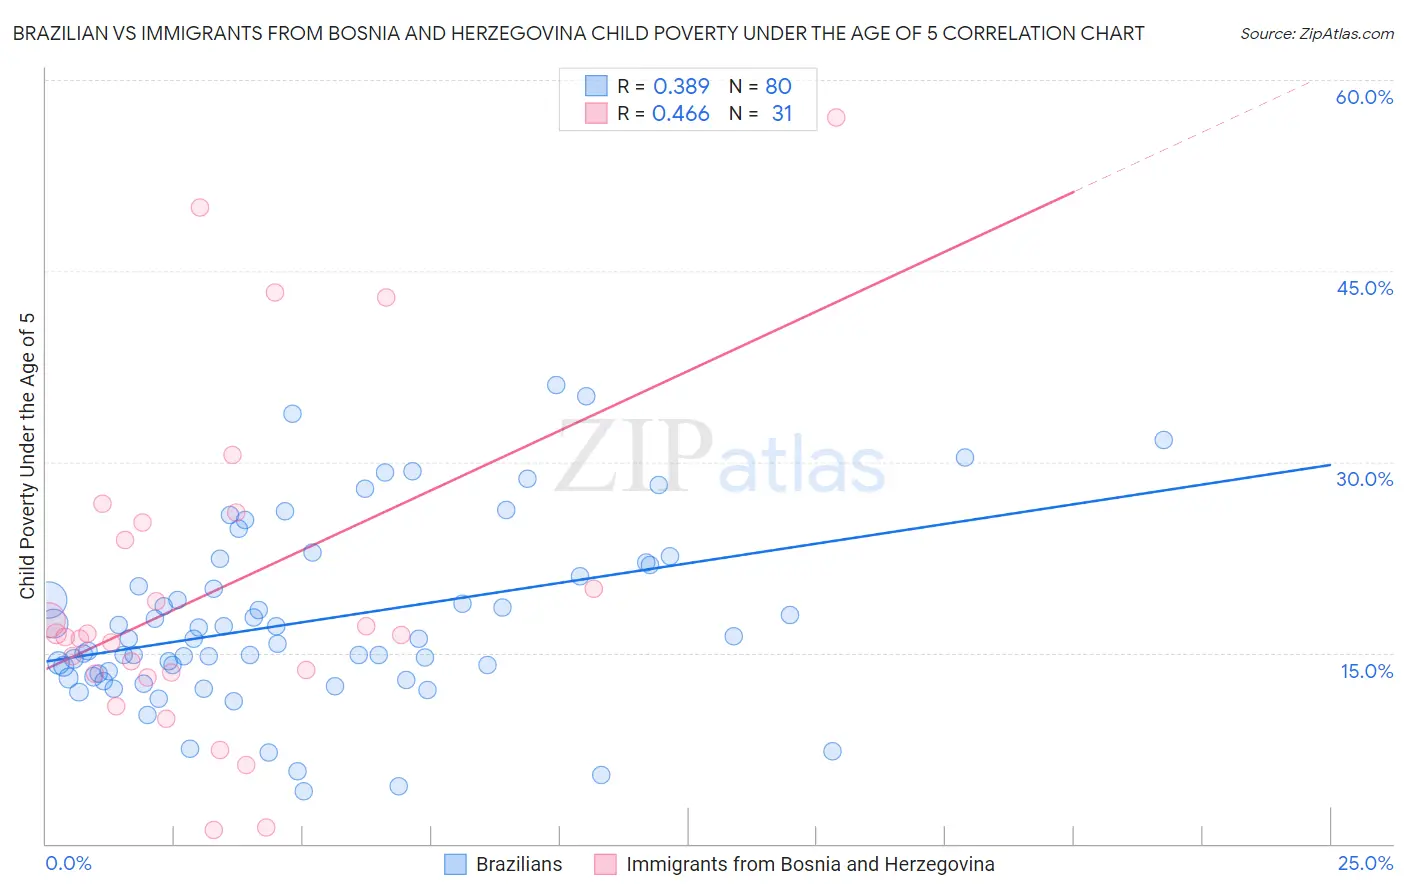 Brazilian vs Immigrants from Bosnia and Herzegovina Child Poverty Under the Age of 5